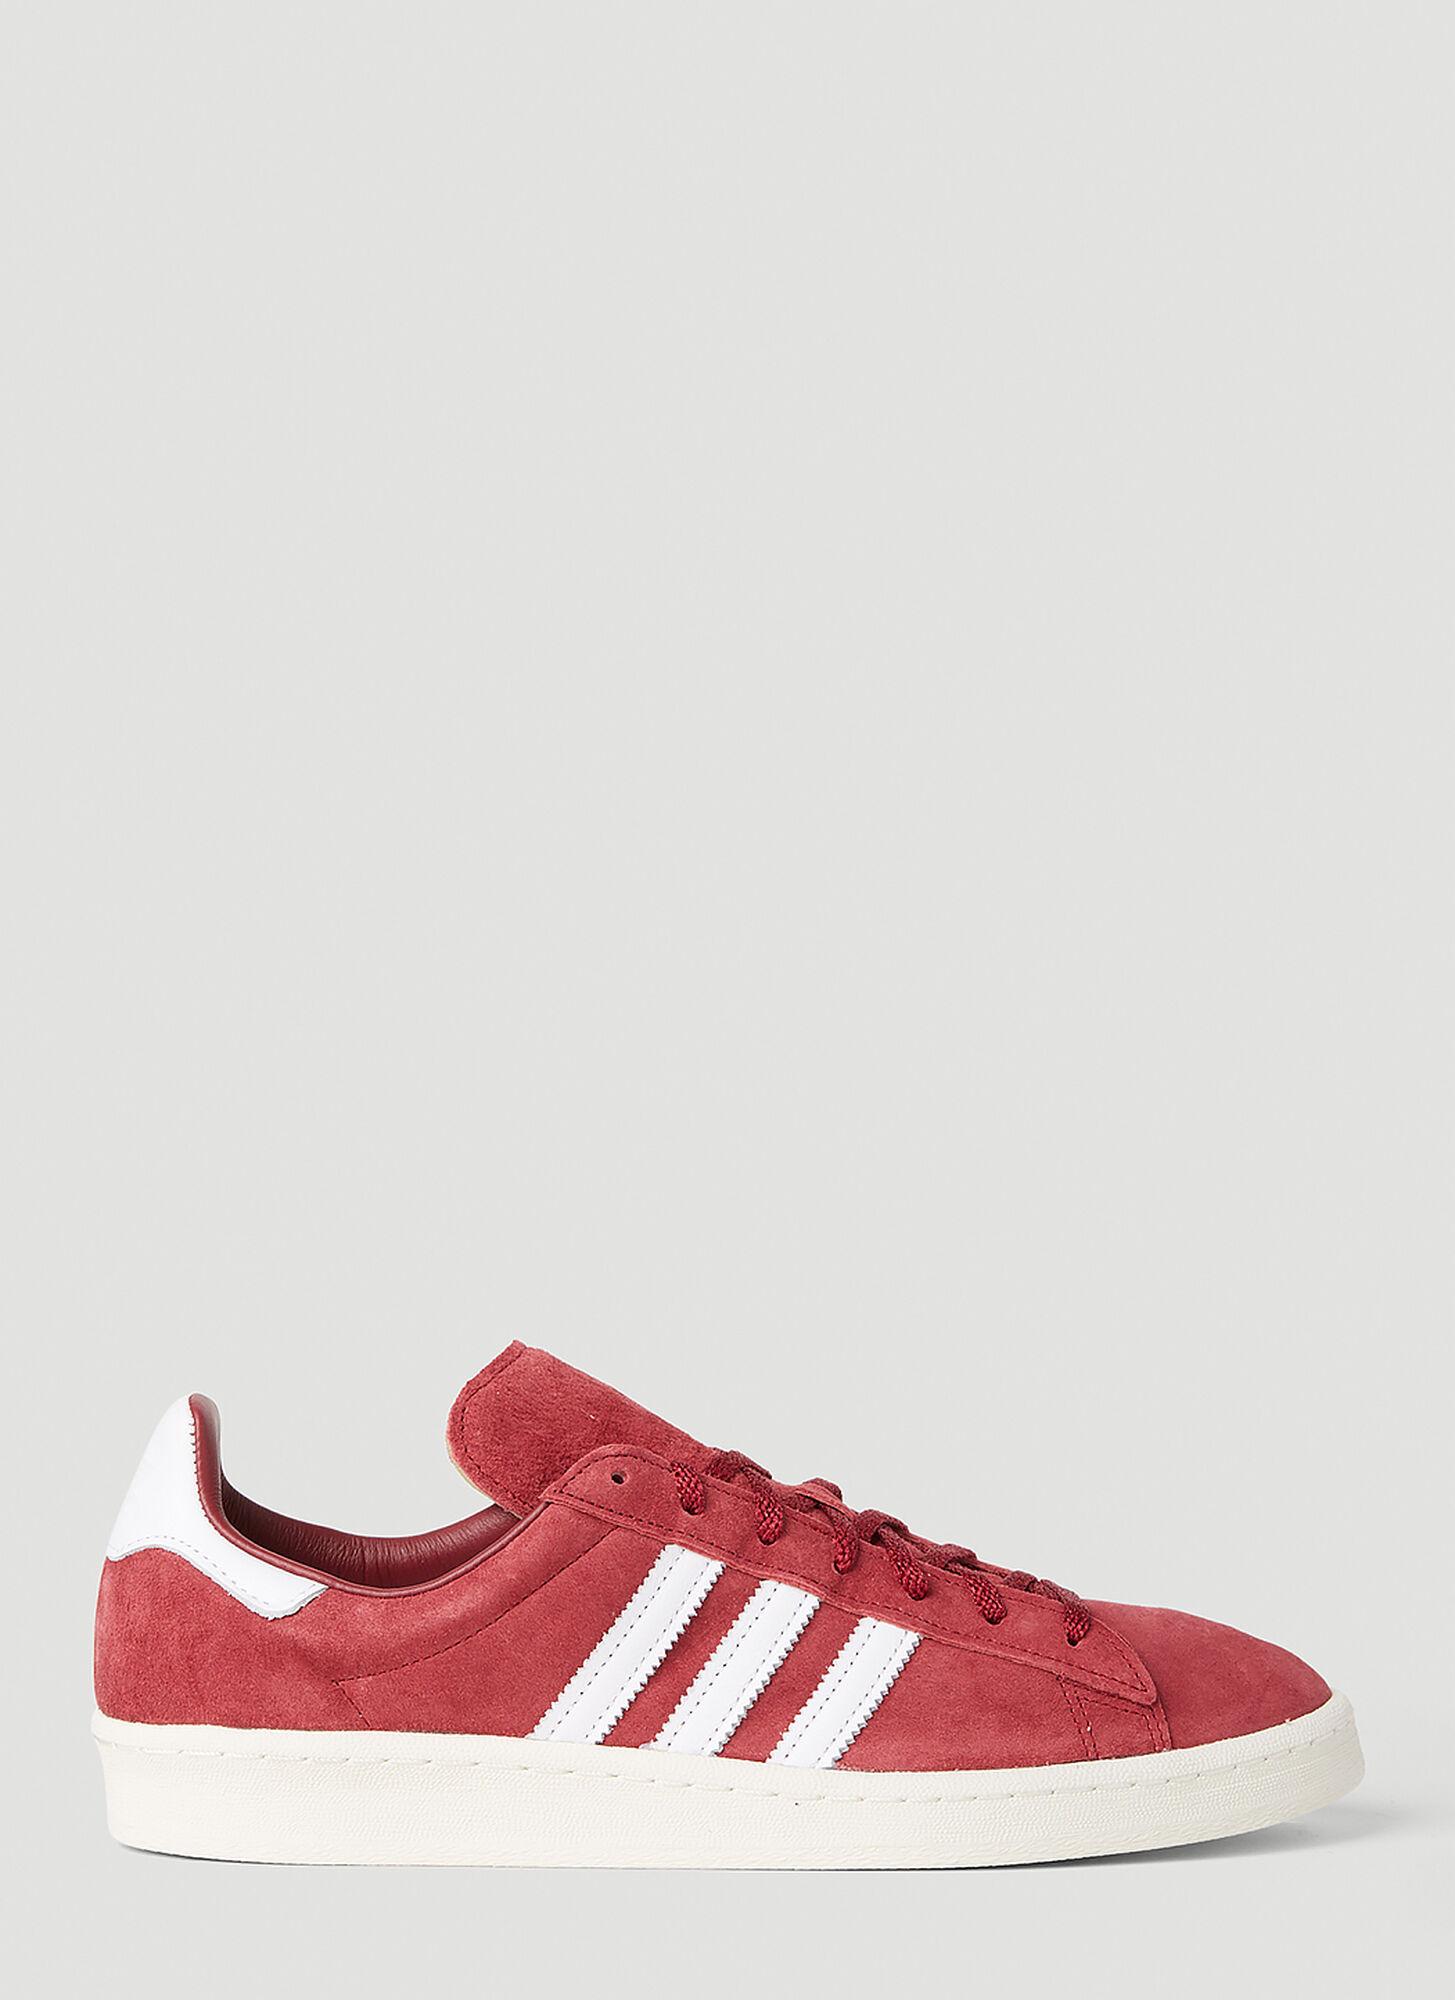 adidas Campus 80s Sneakers in Red for Men | Lyst